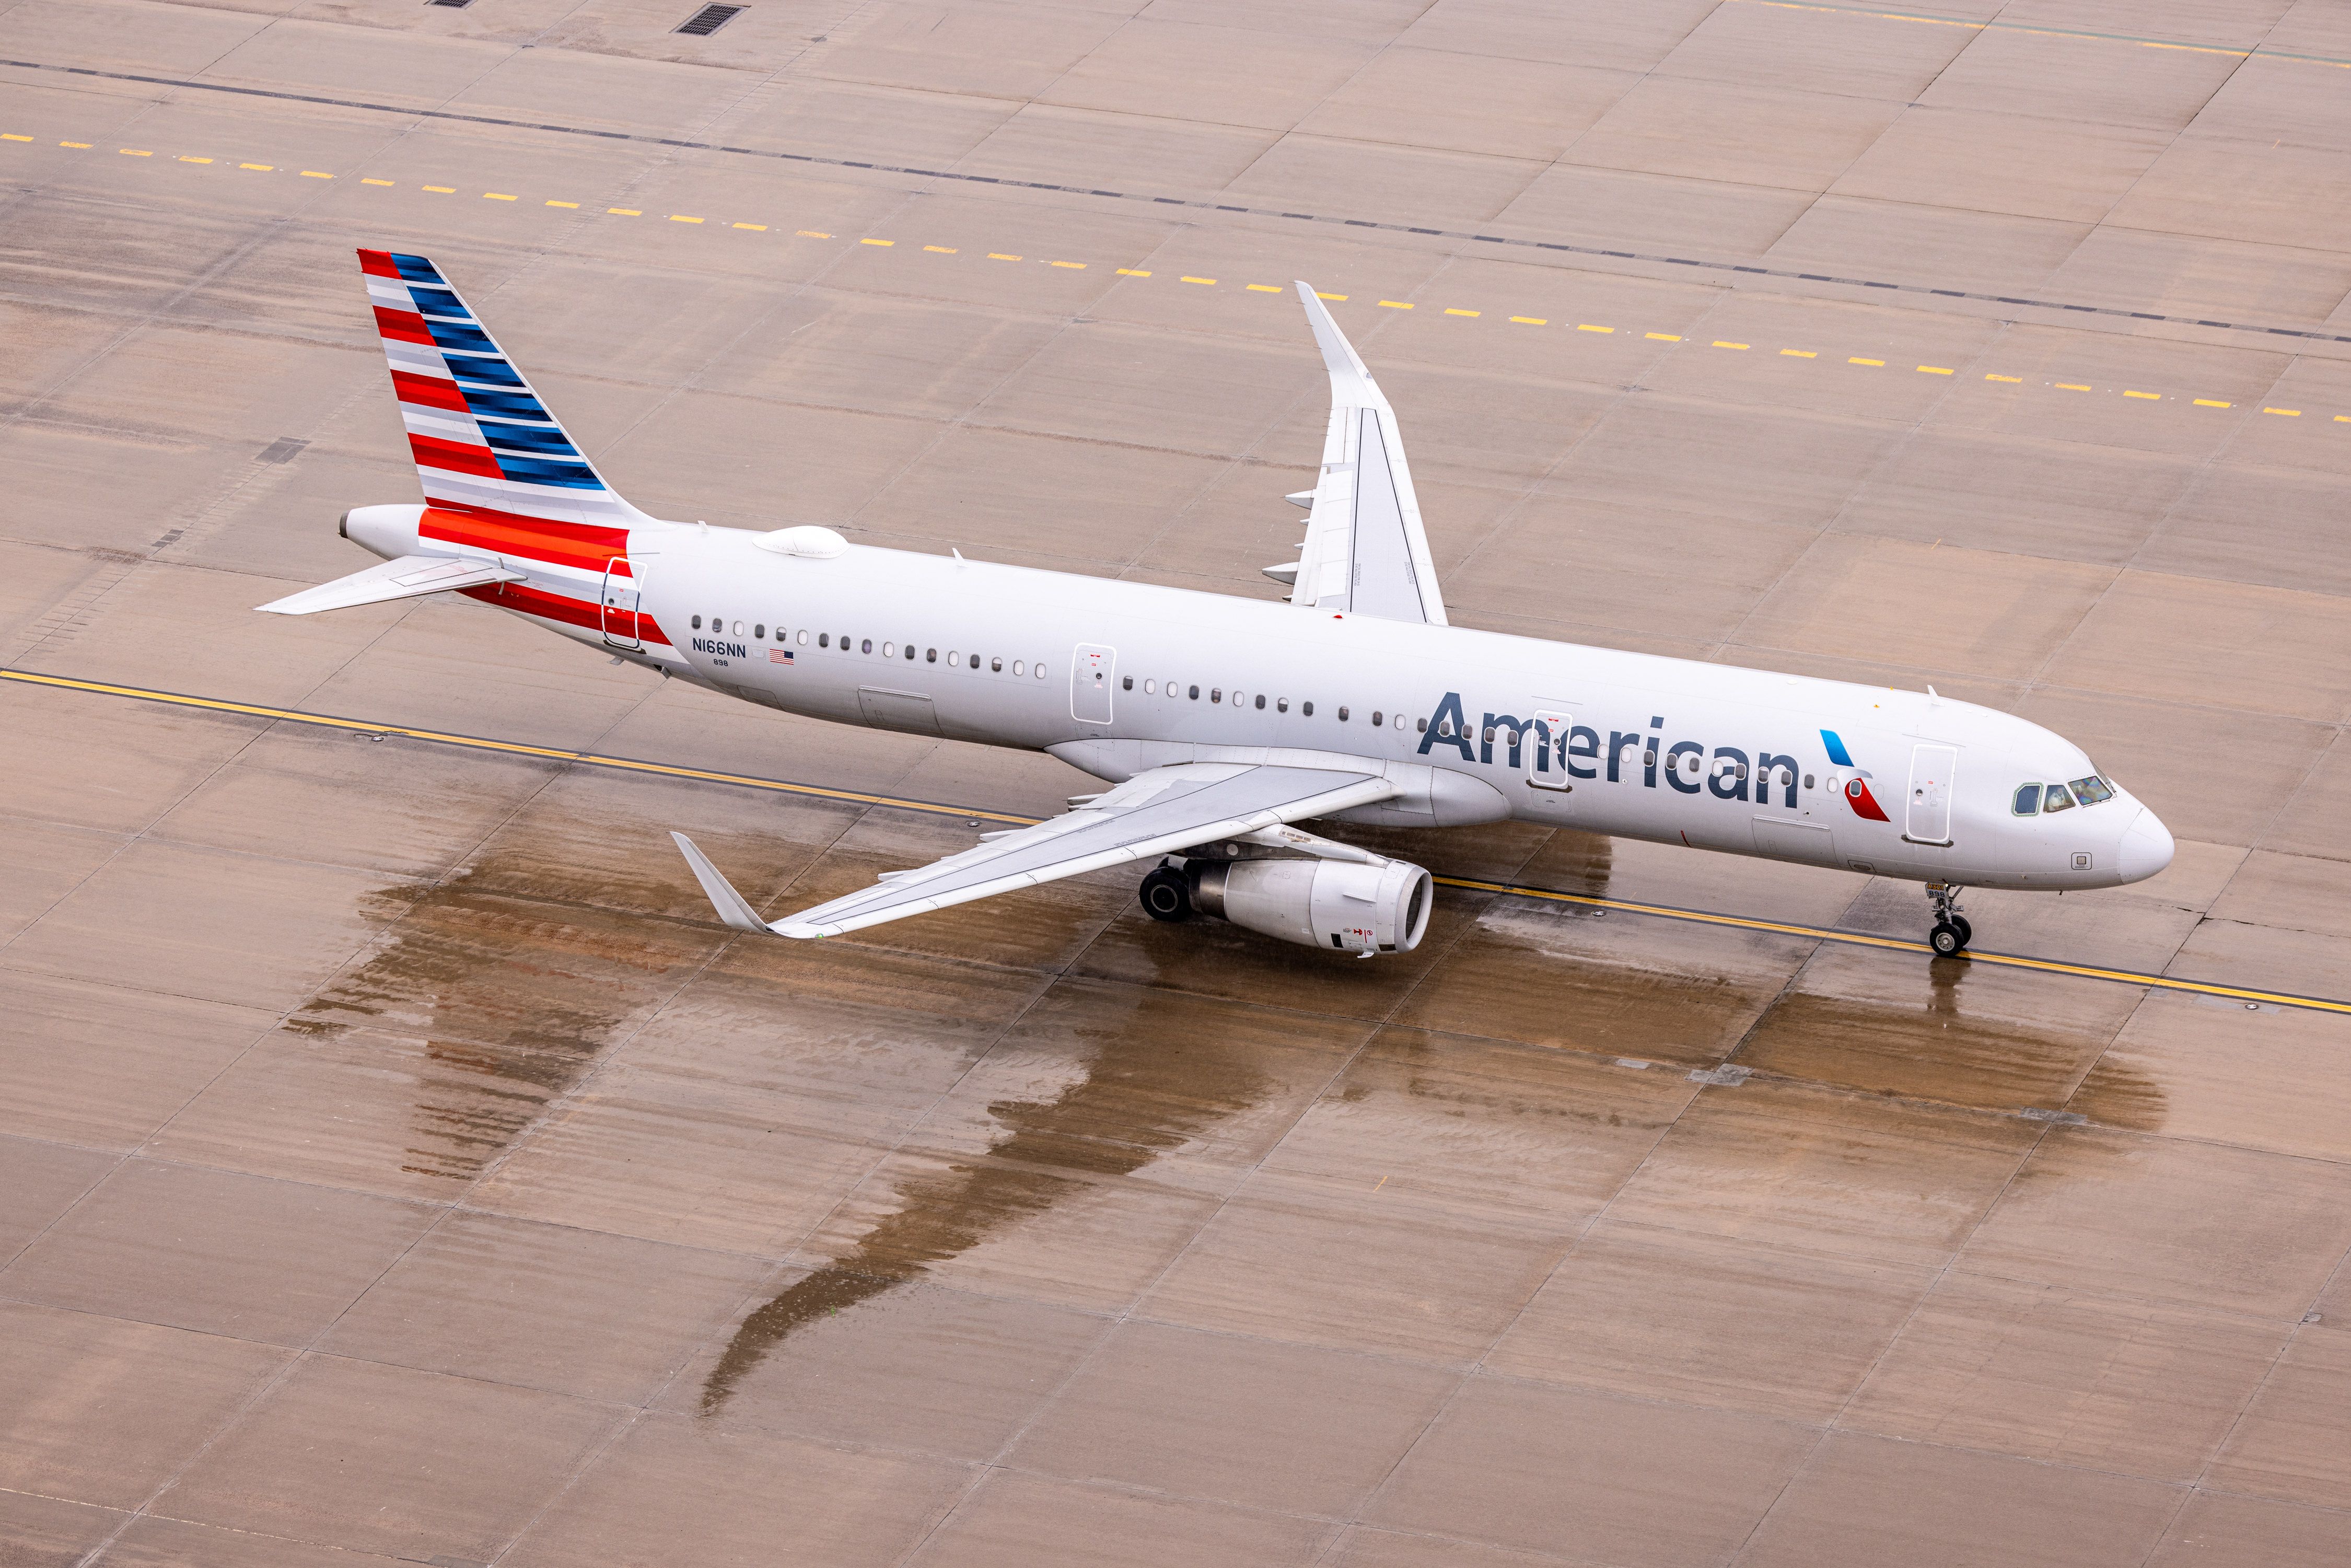 An American Airlines plane